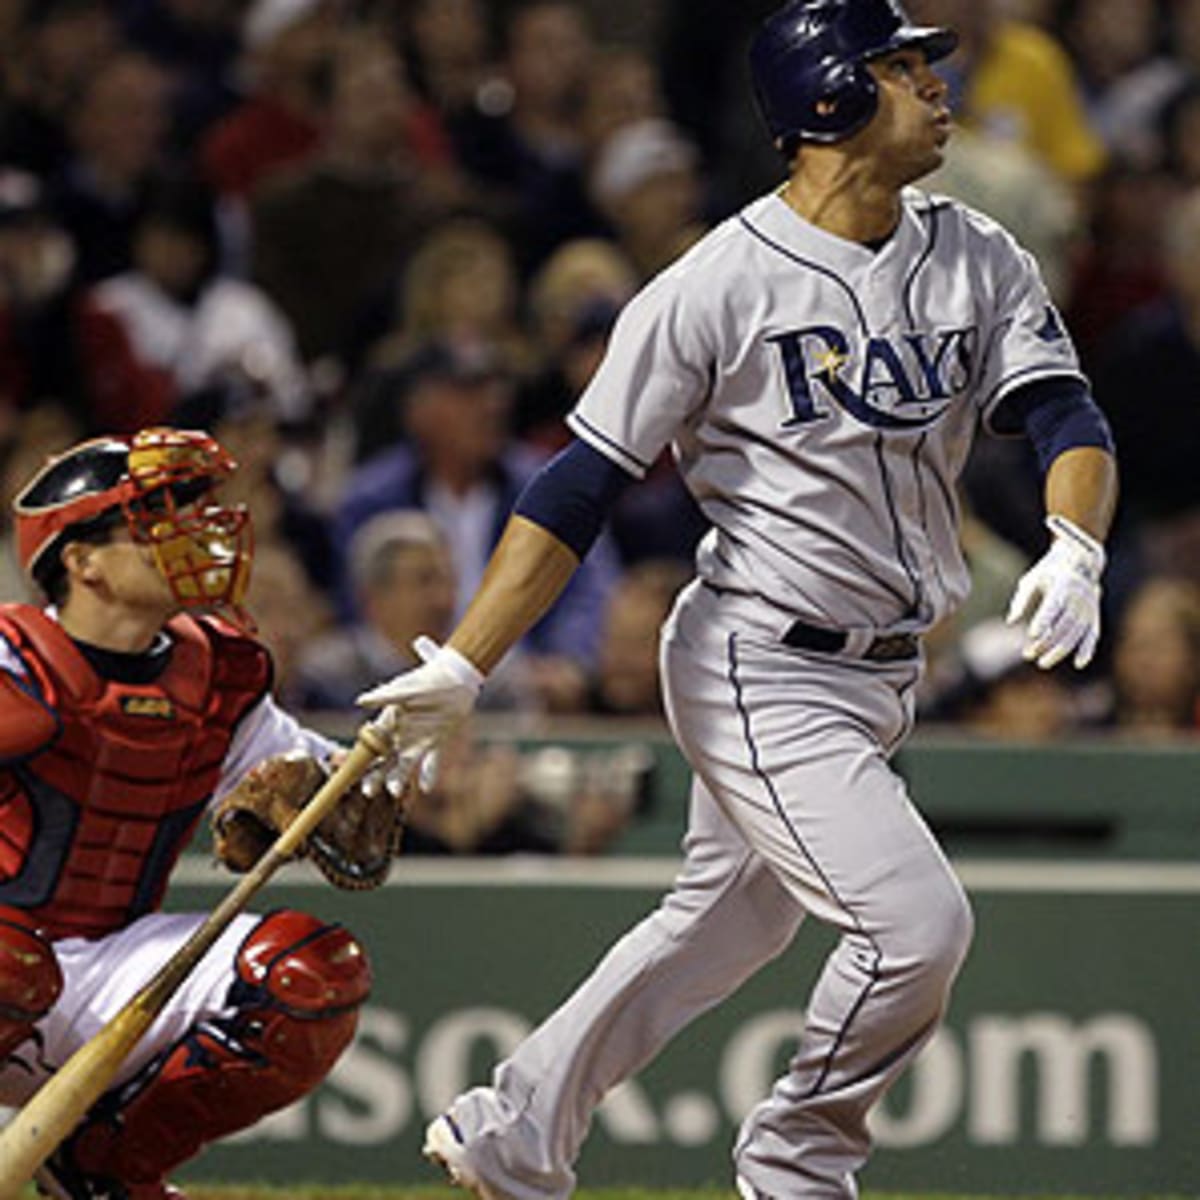 Ben Reiter: The Rays' Evan Longoria is so good, so young - Sports  Illustrated